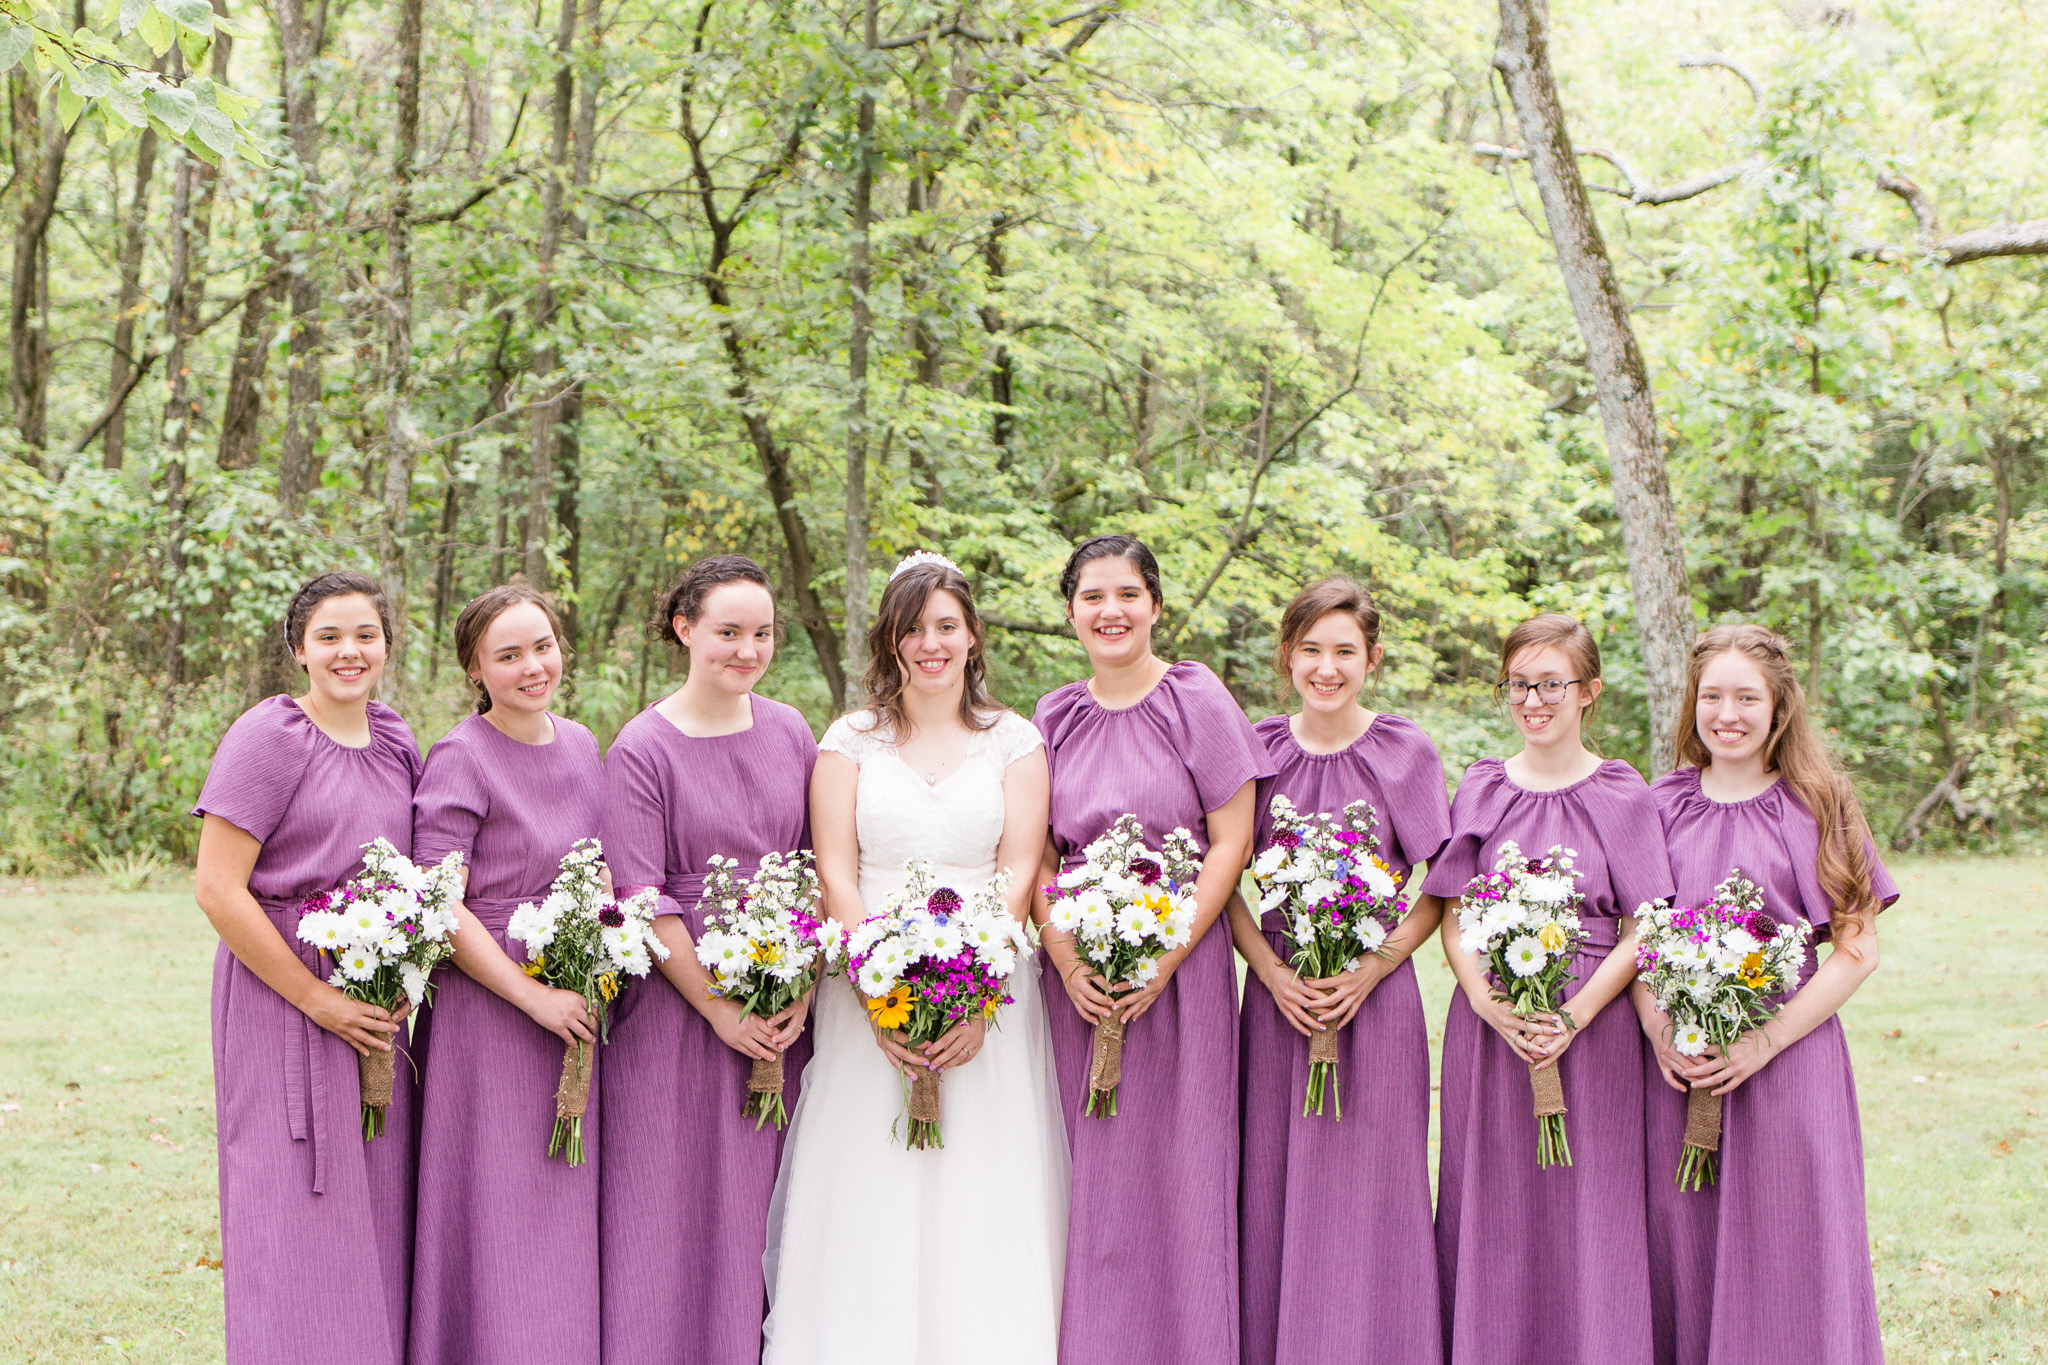 Purple bridesmaid dresses and wildflower wedding bouquets